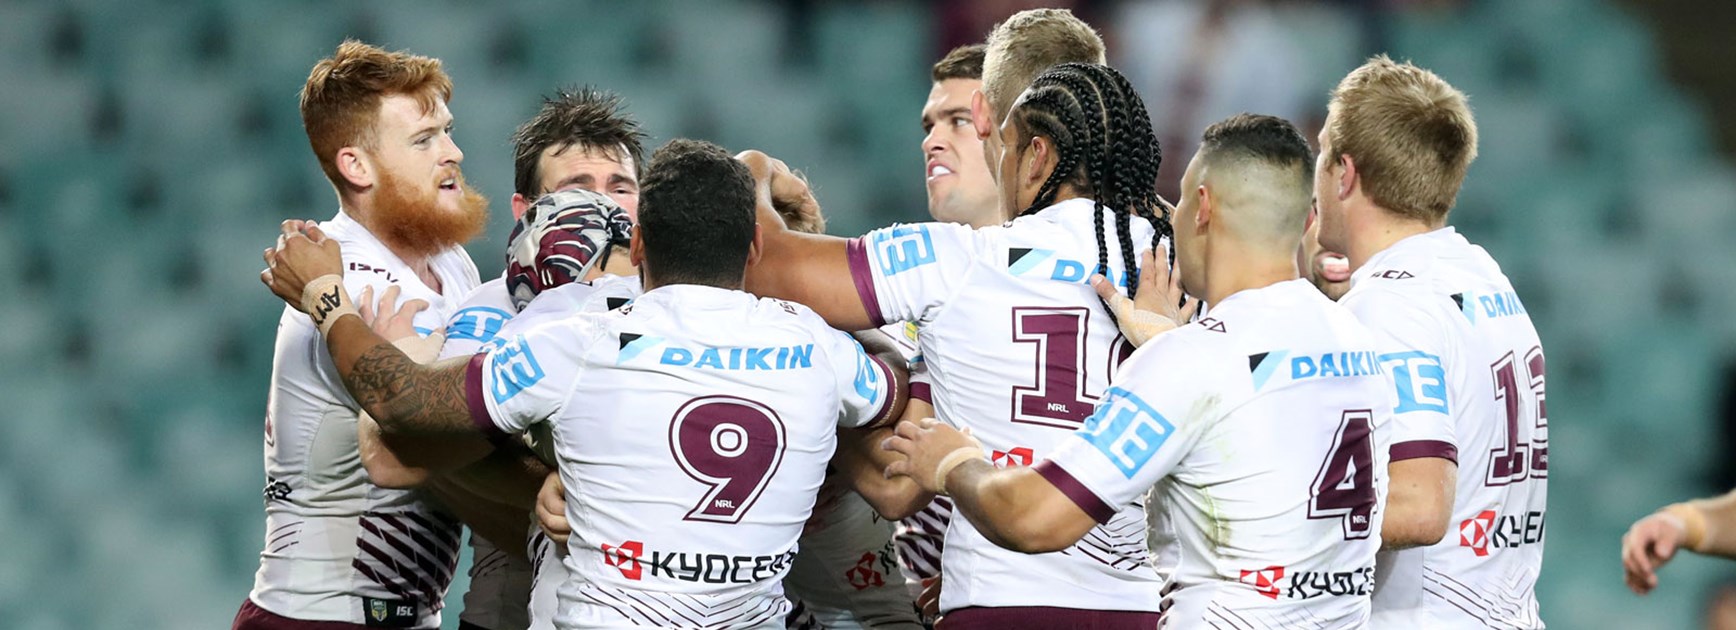 Manly players celebrate in their match against South Sydney in Round 20.